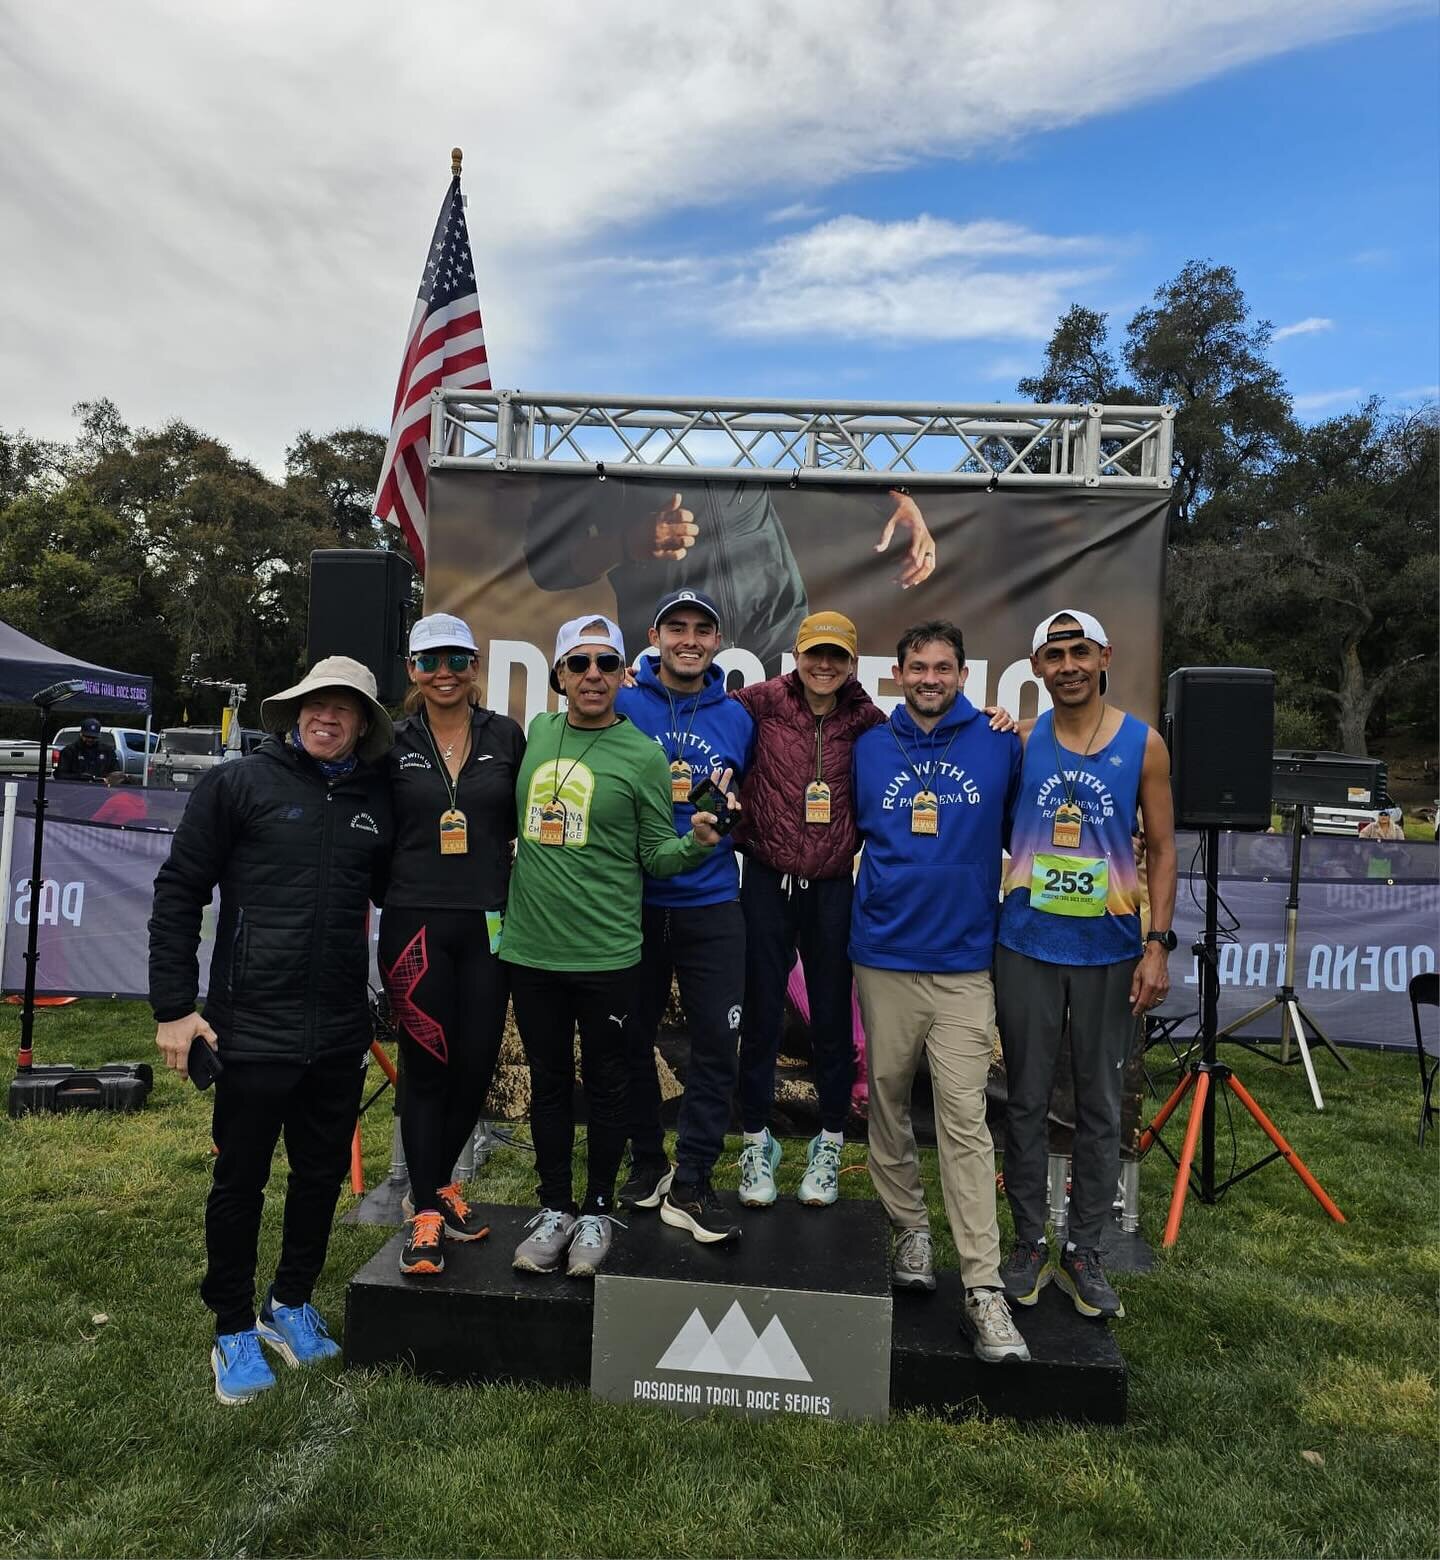 James, Rene, and Peachy crushed the 10 mile distance with James bringing home his first win as a father! 

Daniel and Art crushed it in the 5 mile distance this past Sunday taking 1st and 3rd respectively!! 

Congrats to everyone out there going afte